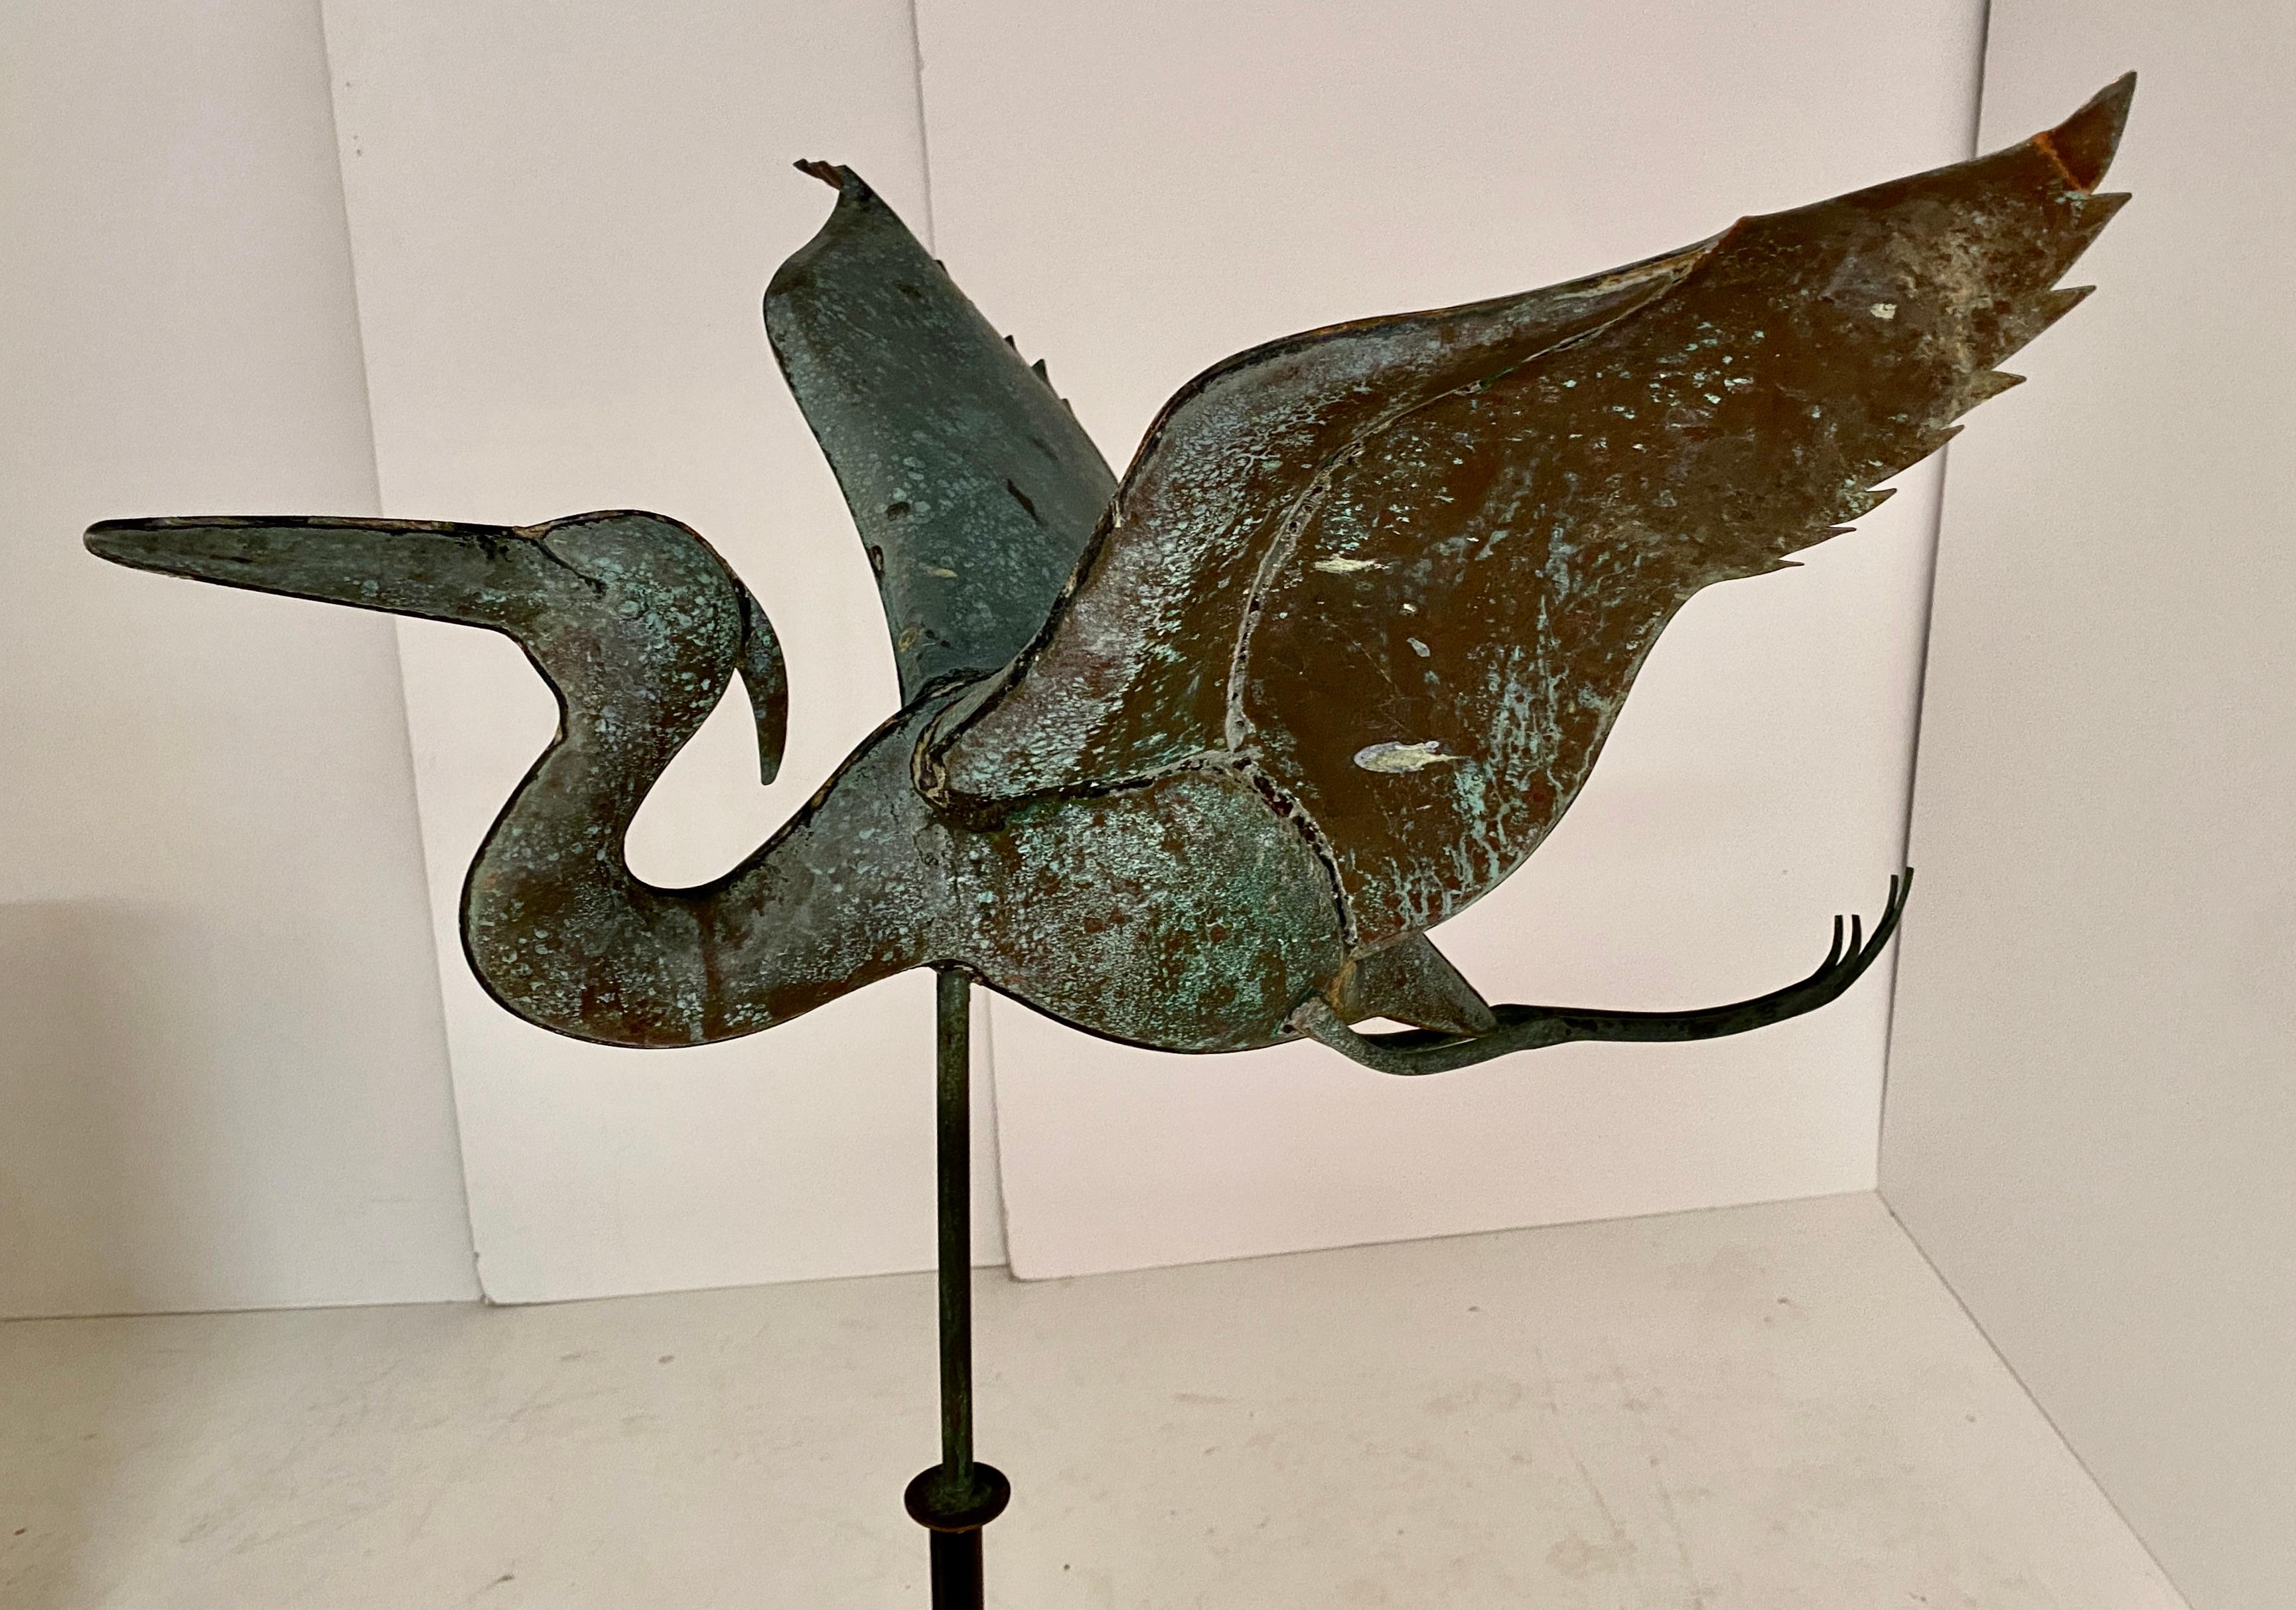 Well crafted heron weathervane in copper. Wonderful natural patina. Unusual subject: spread wing heron with trailing legs, just as in nature. Fitted into a painted metal stand.